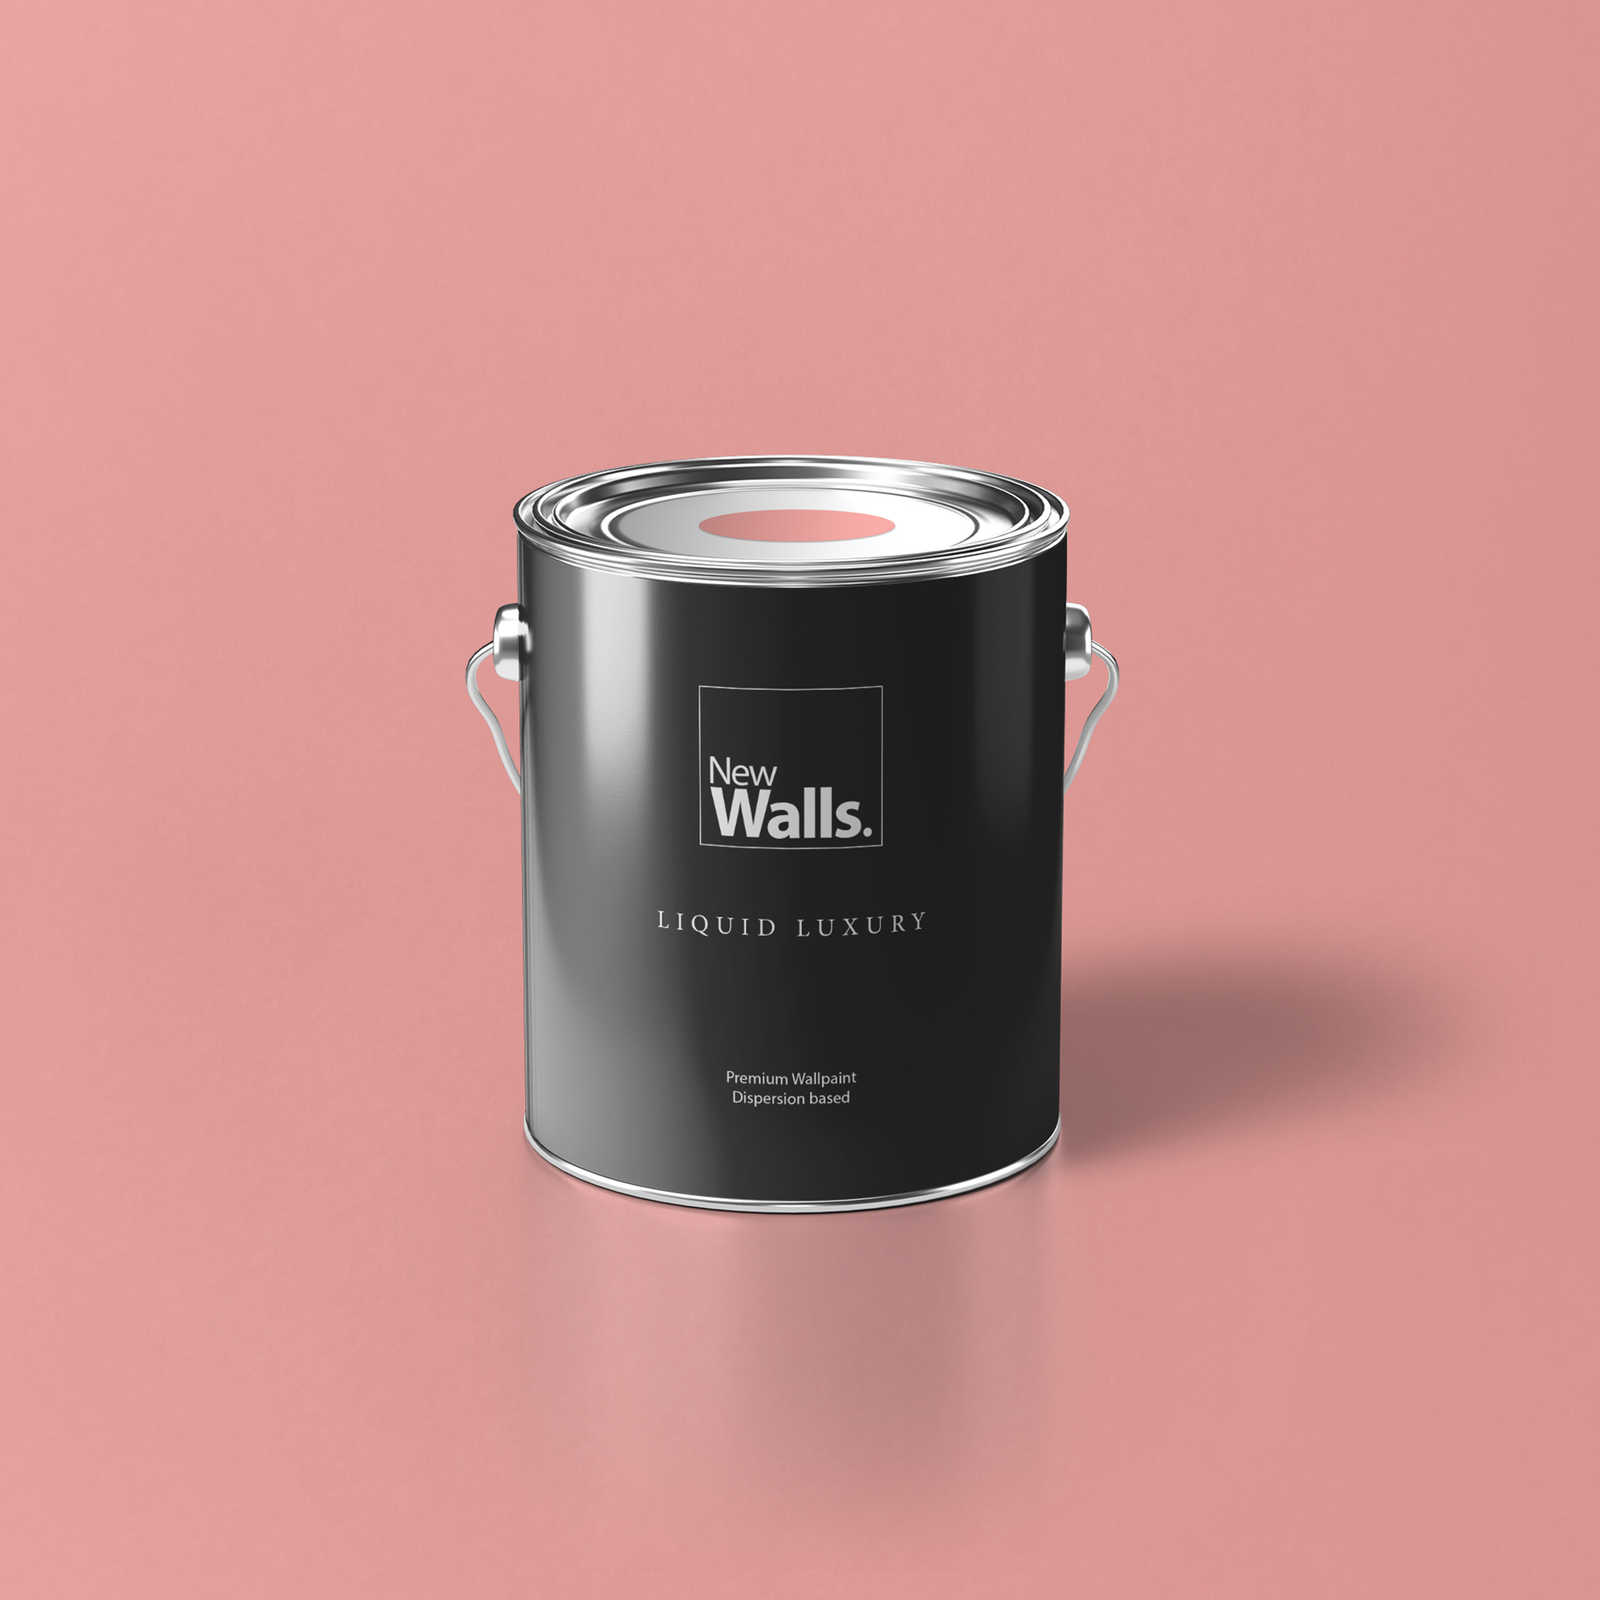 Premium Wall Paint Lovely Salmon »Blooming Blossom« NW1014 – 2.5 litre
